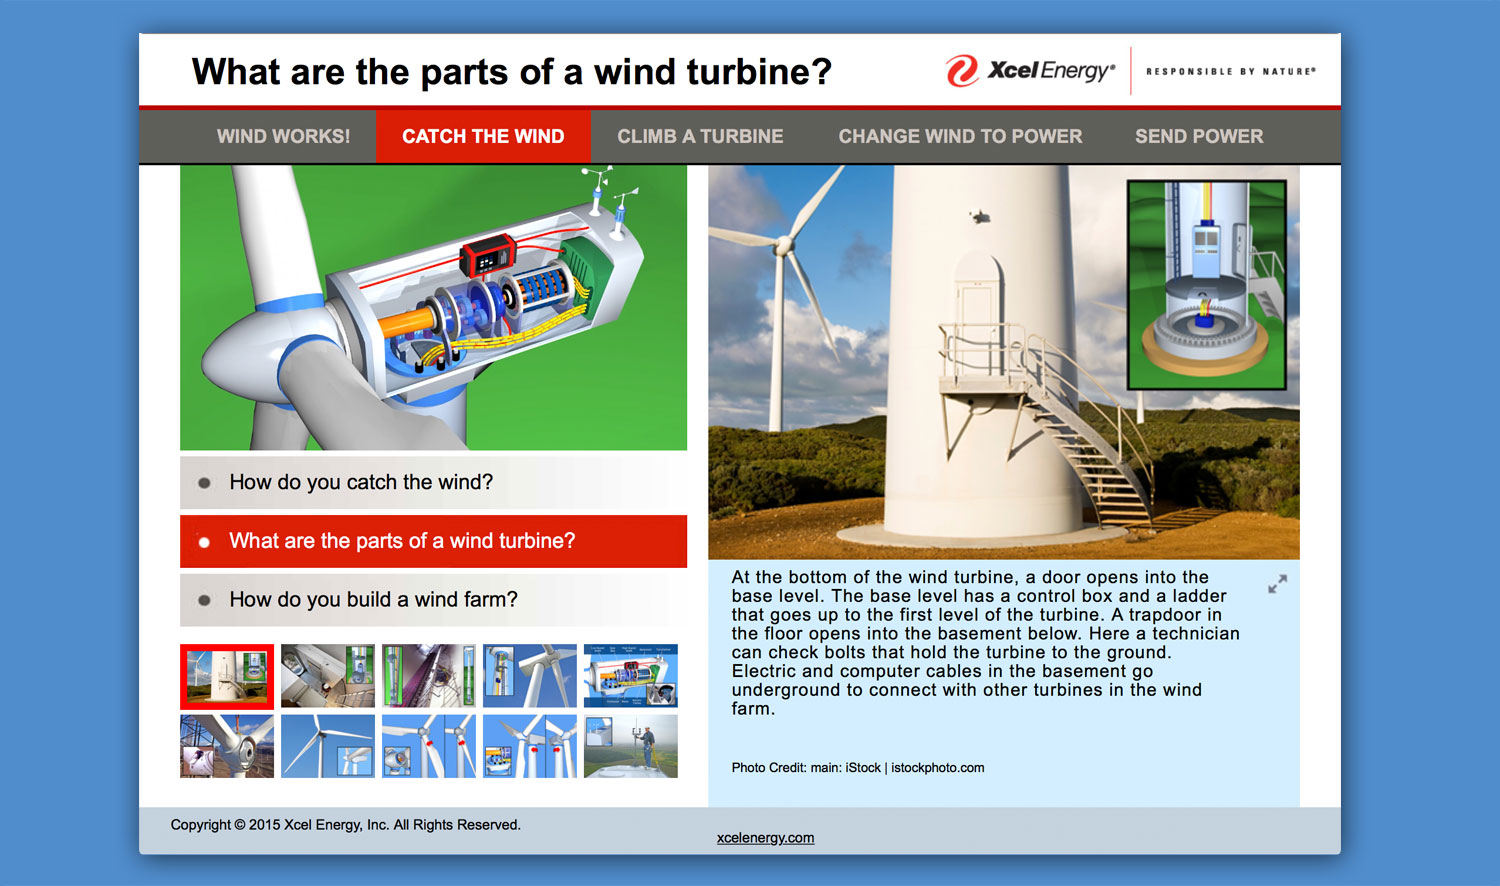  I created a 3D wind turbine to represent its key components. 3D animations demonstrate a turbine’s internal structure and interaction with wind. Photos were combined with 3D images to compare parts of a wind turbine from multiple perspectives. 